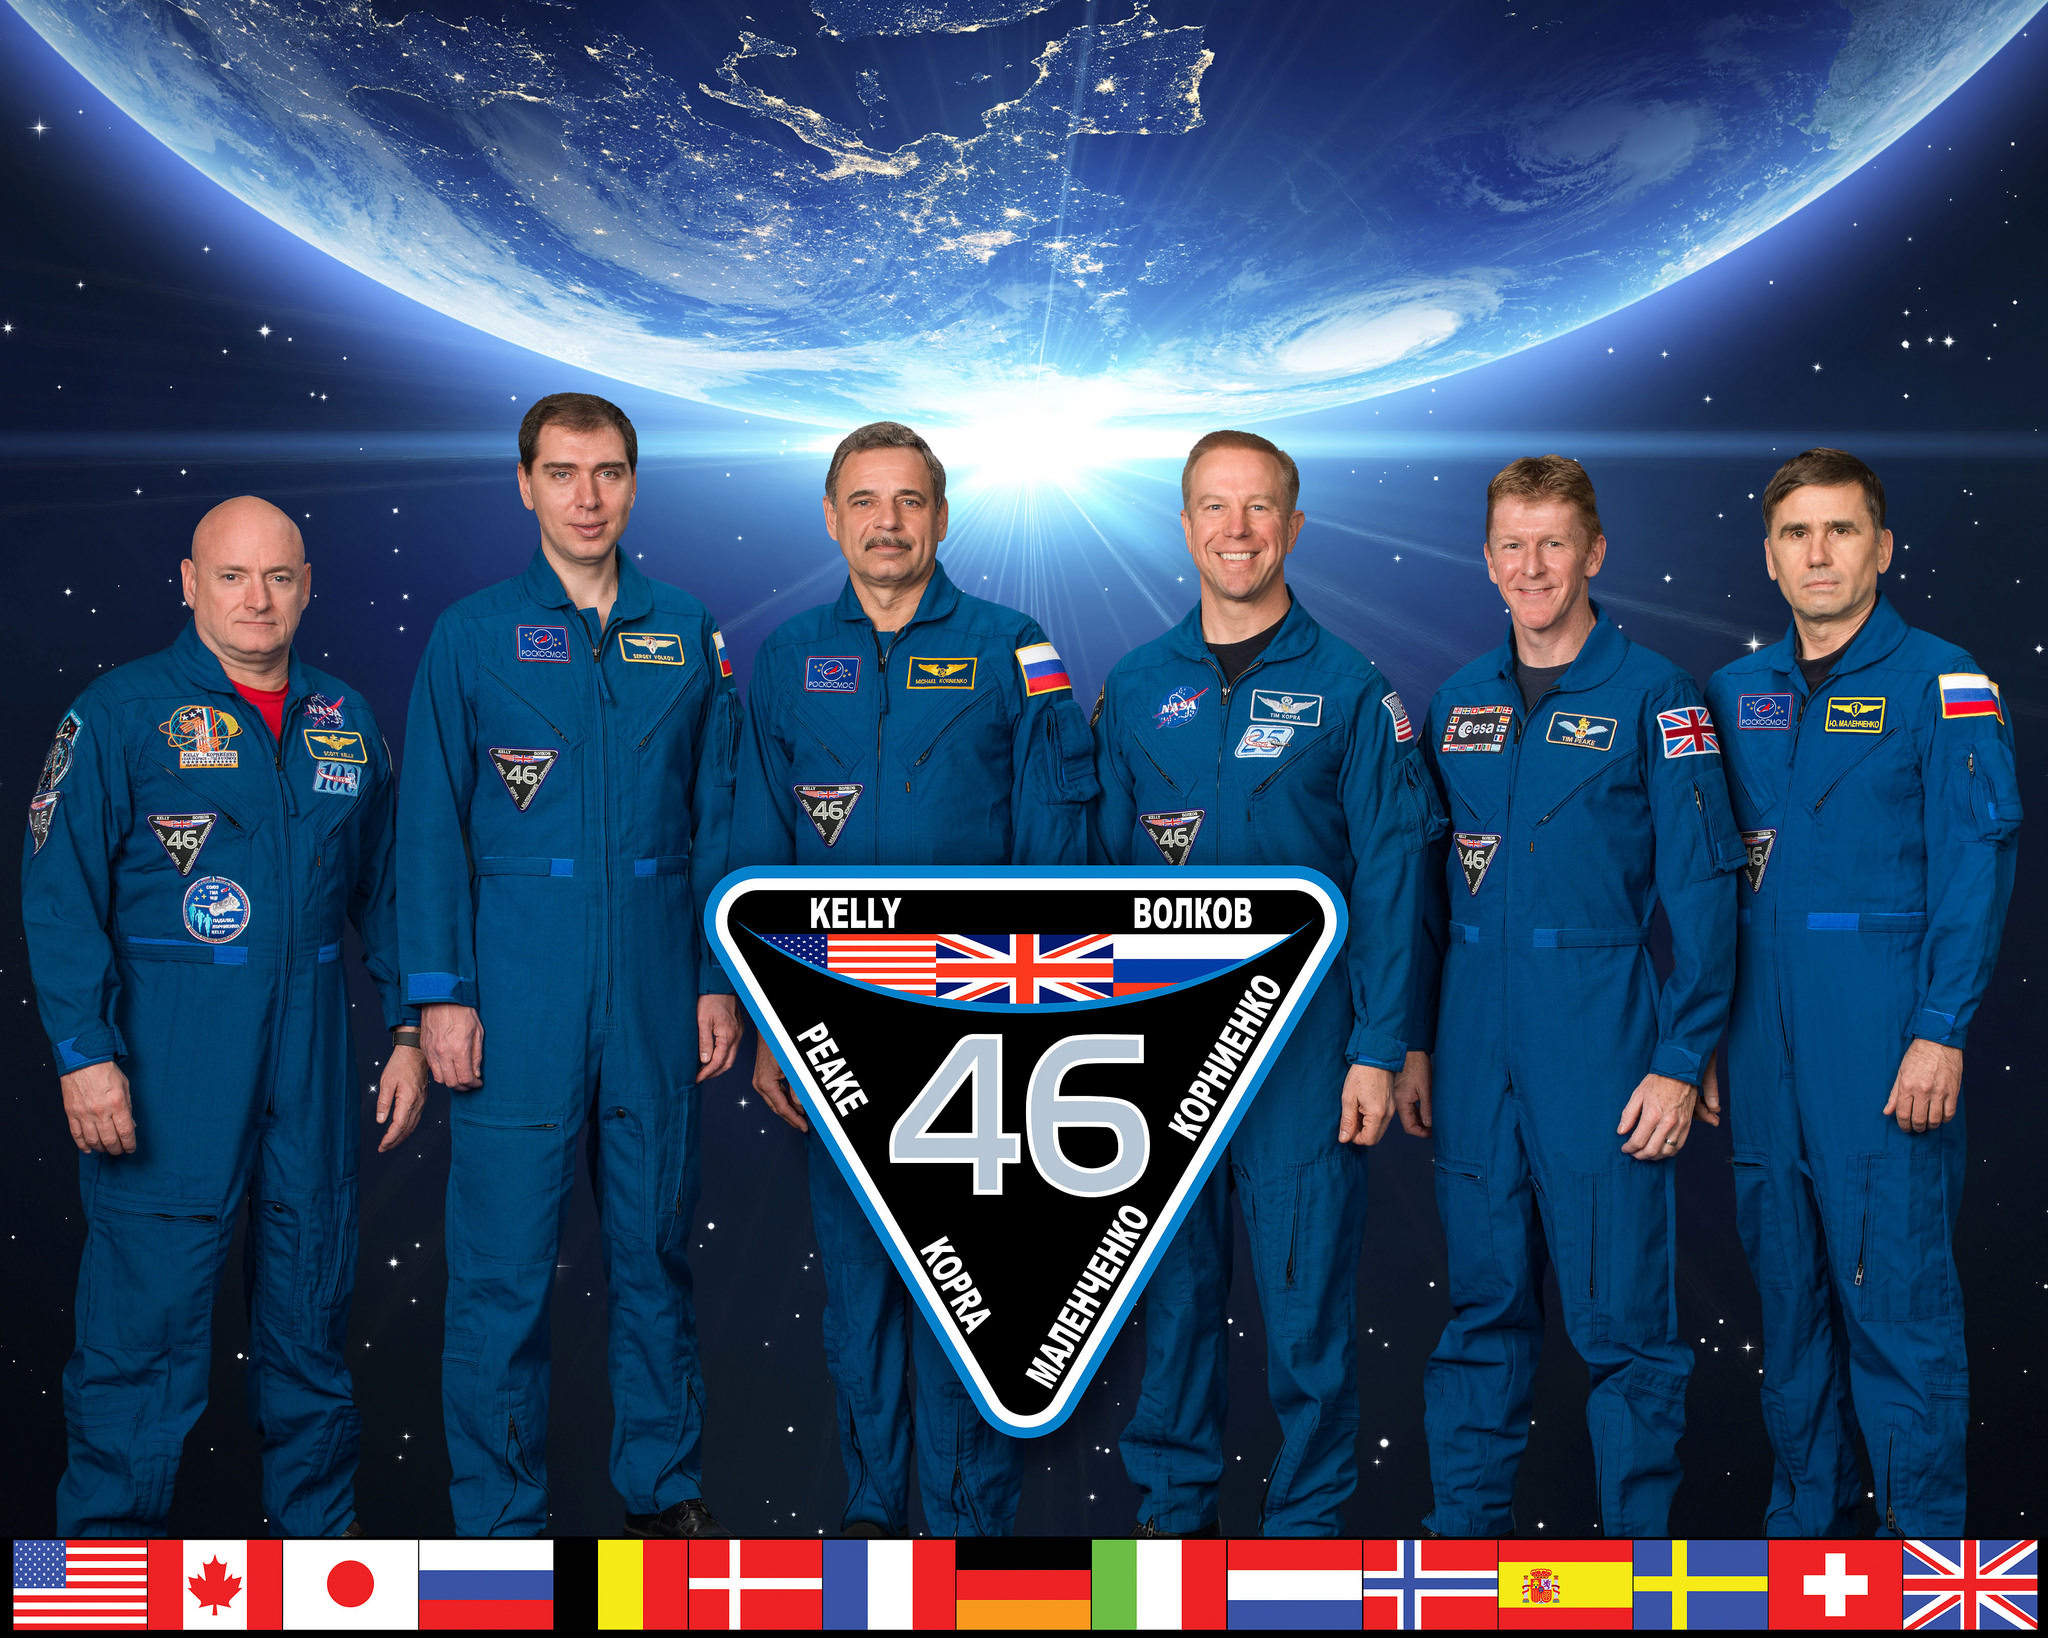 ISS Expedition 46 crew portrait. Credit: NASA